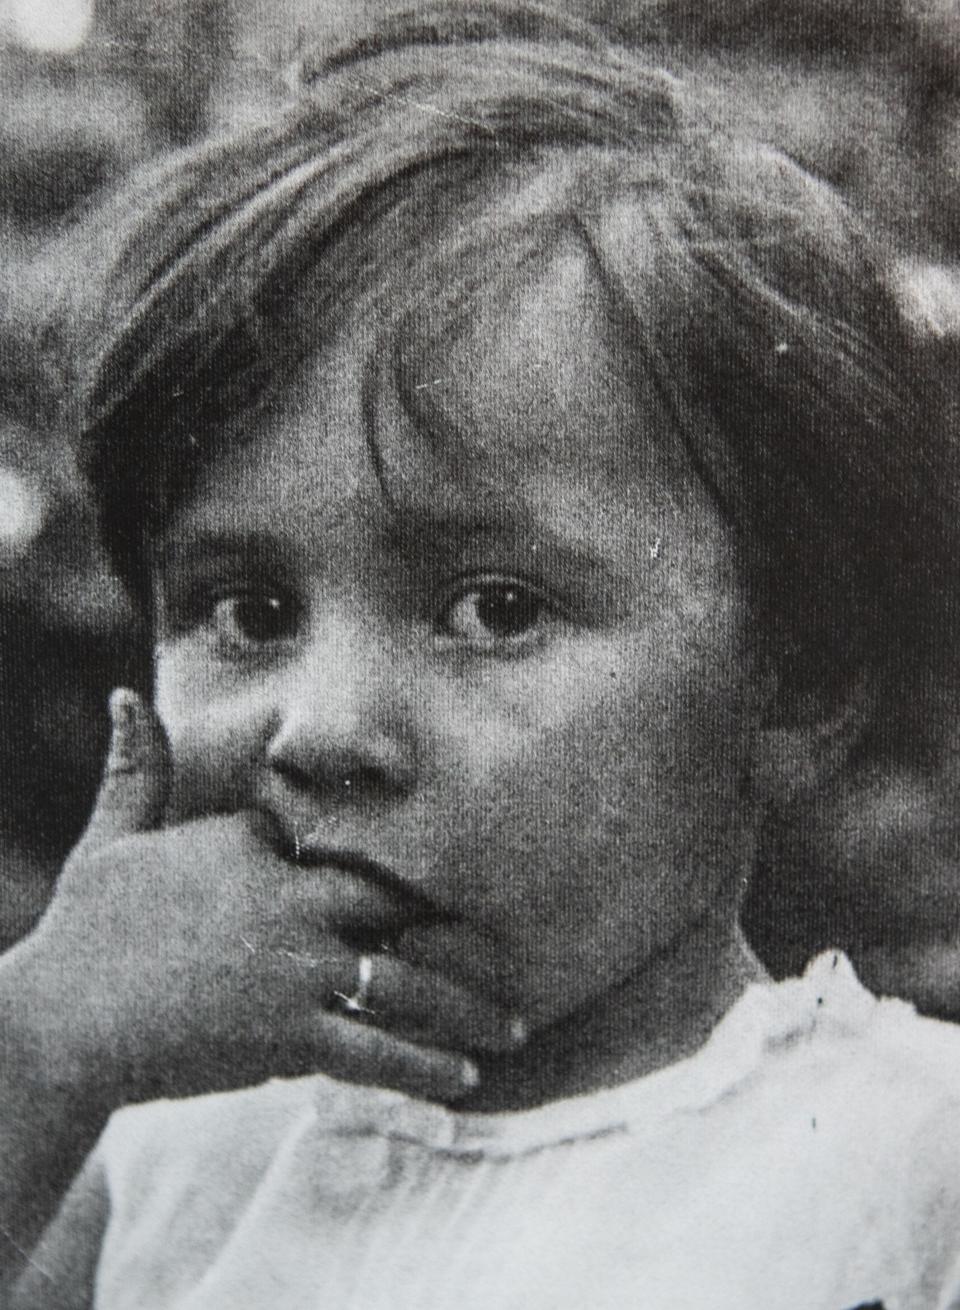 A photograph of Hanne Holsten as a two-year old in Germany, As a child, Holsten witnessed Kirstallnacht. Known as the ÒNight of Broken Glass" and taking place on Nov. 9 and 10, 1938, Kirstallnacht saw widespread pograms that destroyed Jewish businesses and led to the mass arrest and deportation of Jews to concentration camps. Holsten, now 93, and a resident of Hartsdale, sees parallels to what she witnessed as a child and the anti-semitism she sees today.